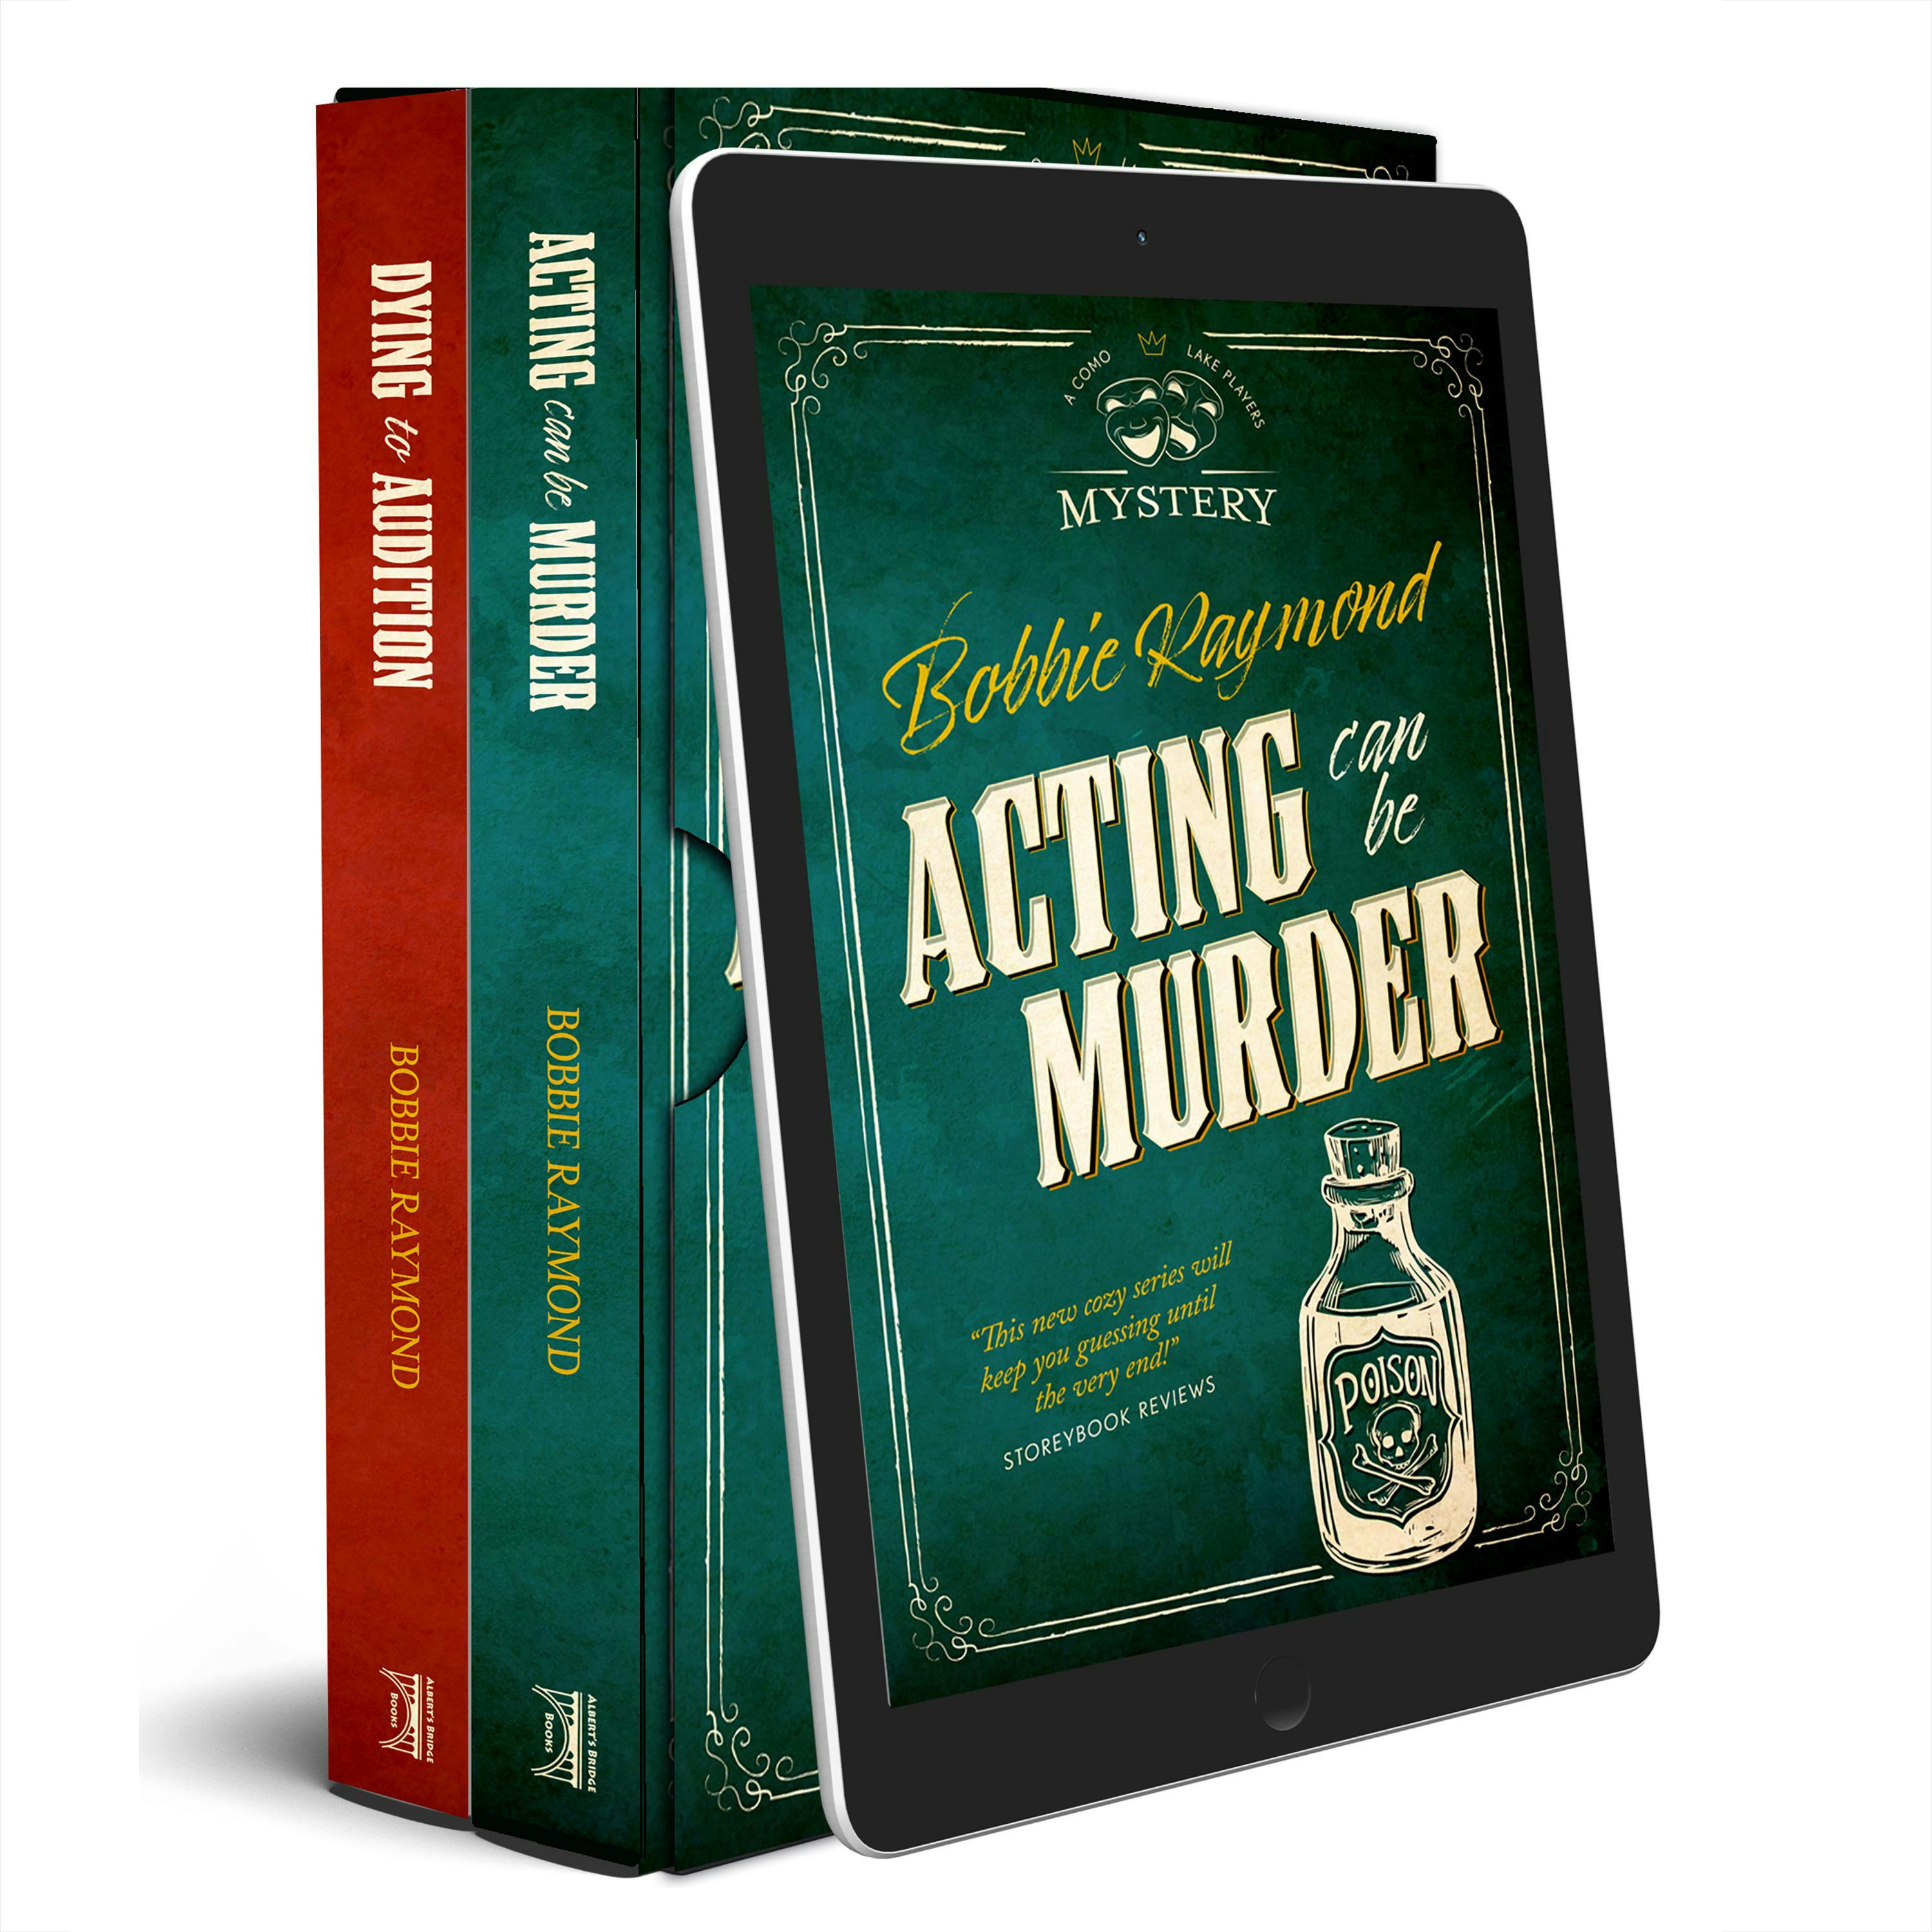 The Como Lake Players Mysteries Box Set: Two Fun and Twisty Mysteries For Theatre Lovers! - Bobbie Raymond